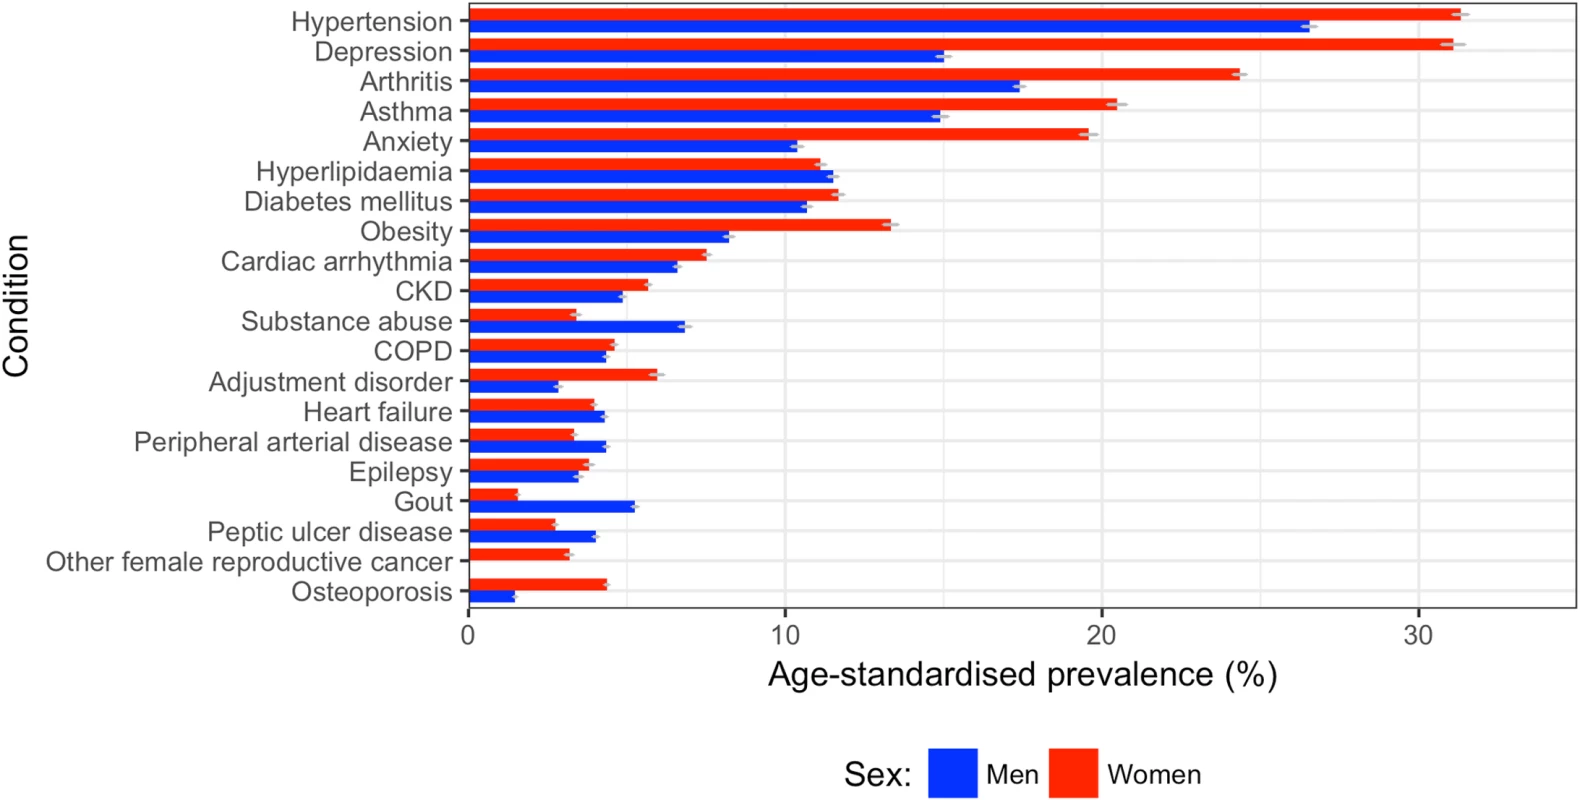 Age-standardised prevalence of comorbidities in women and men.